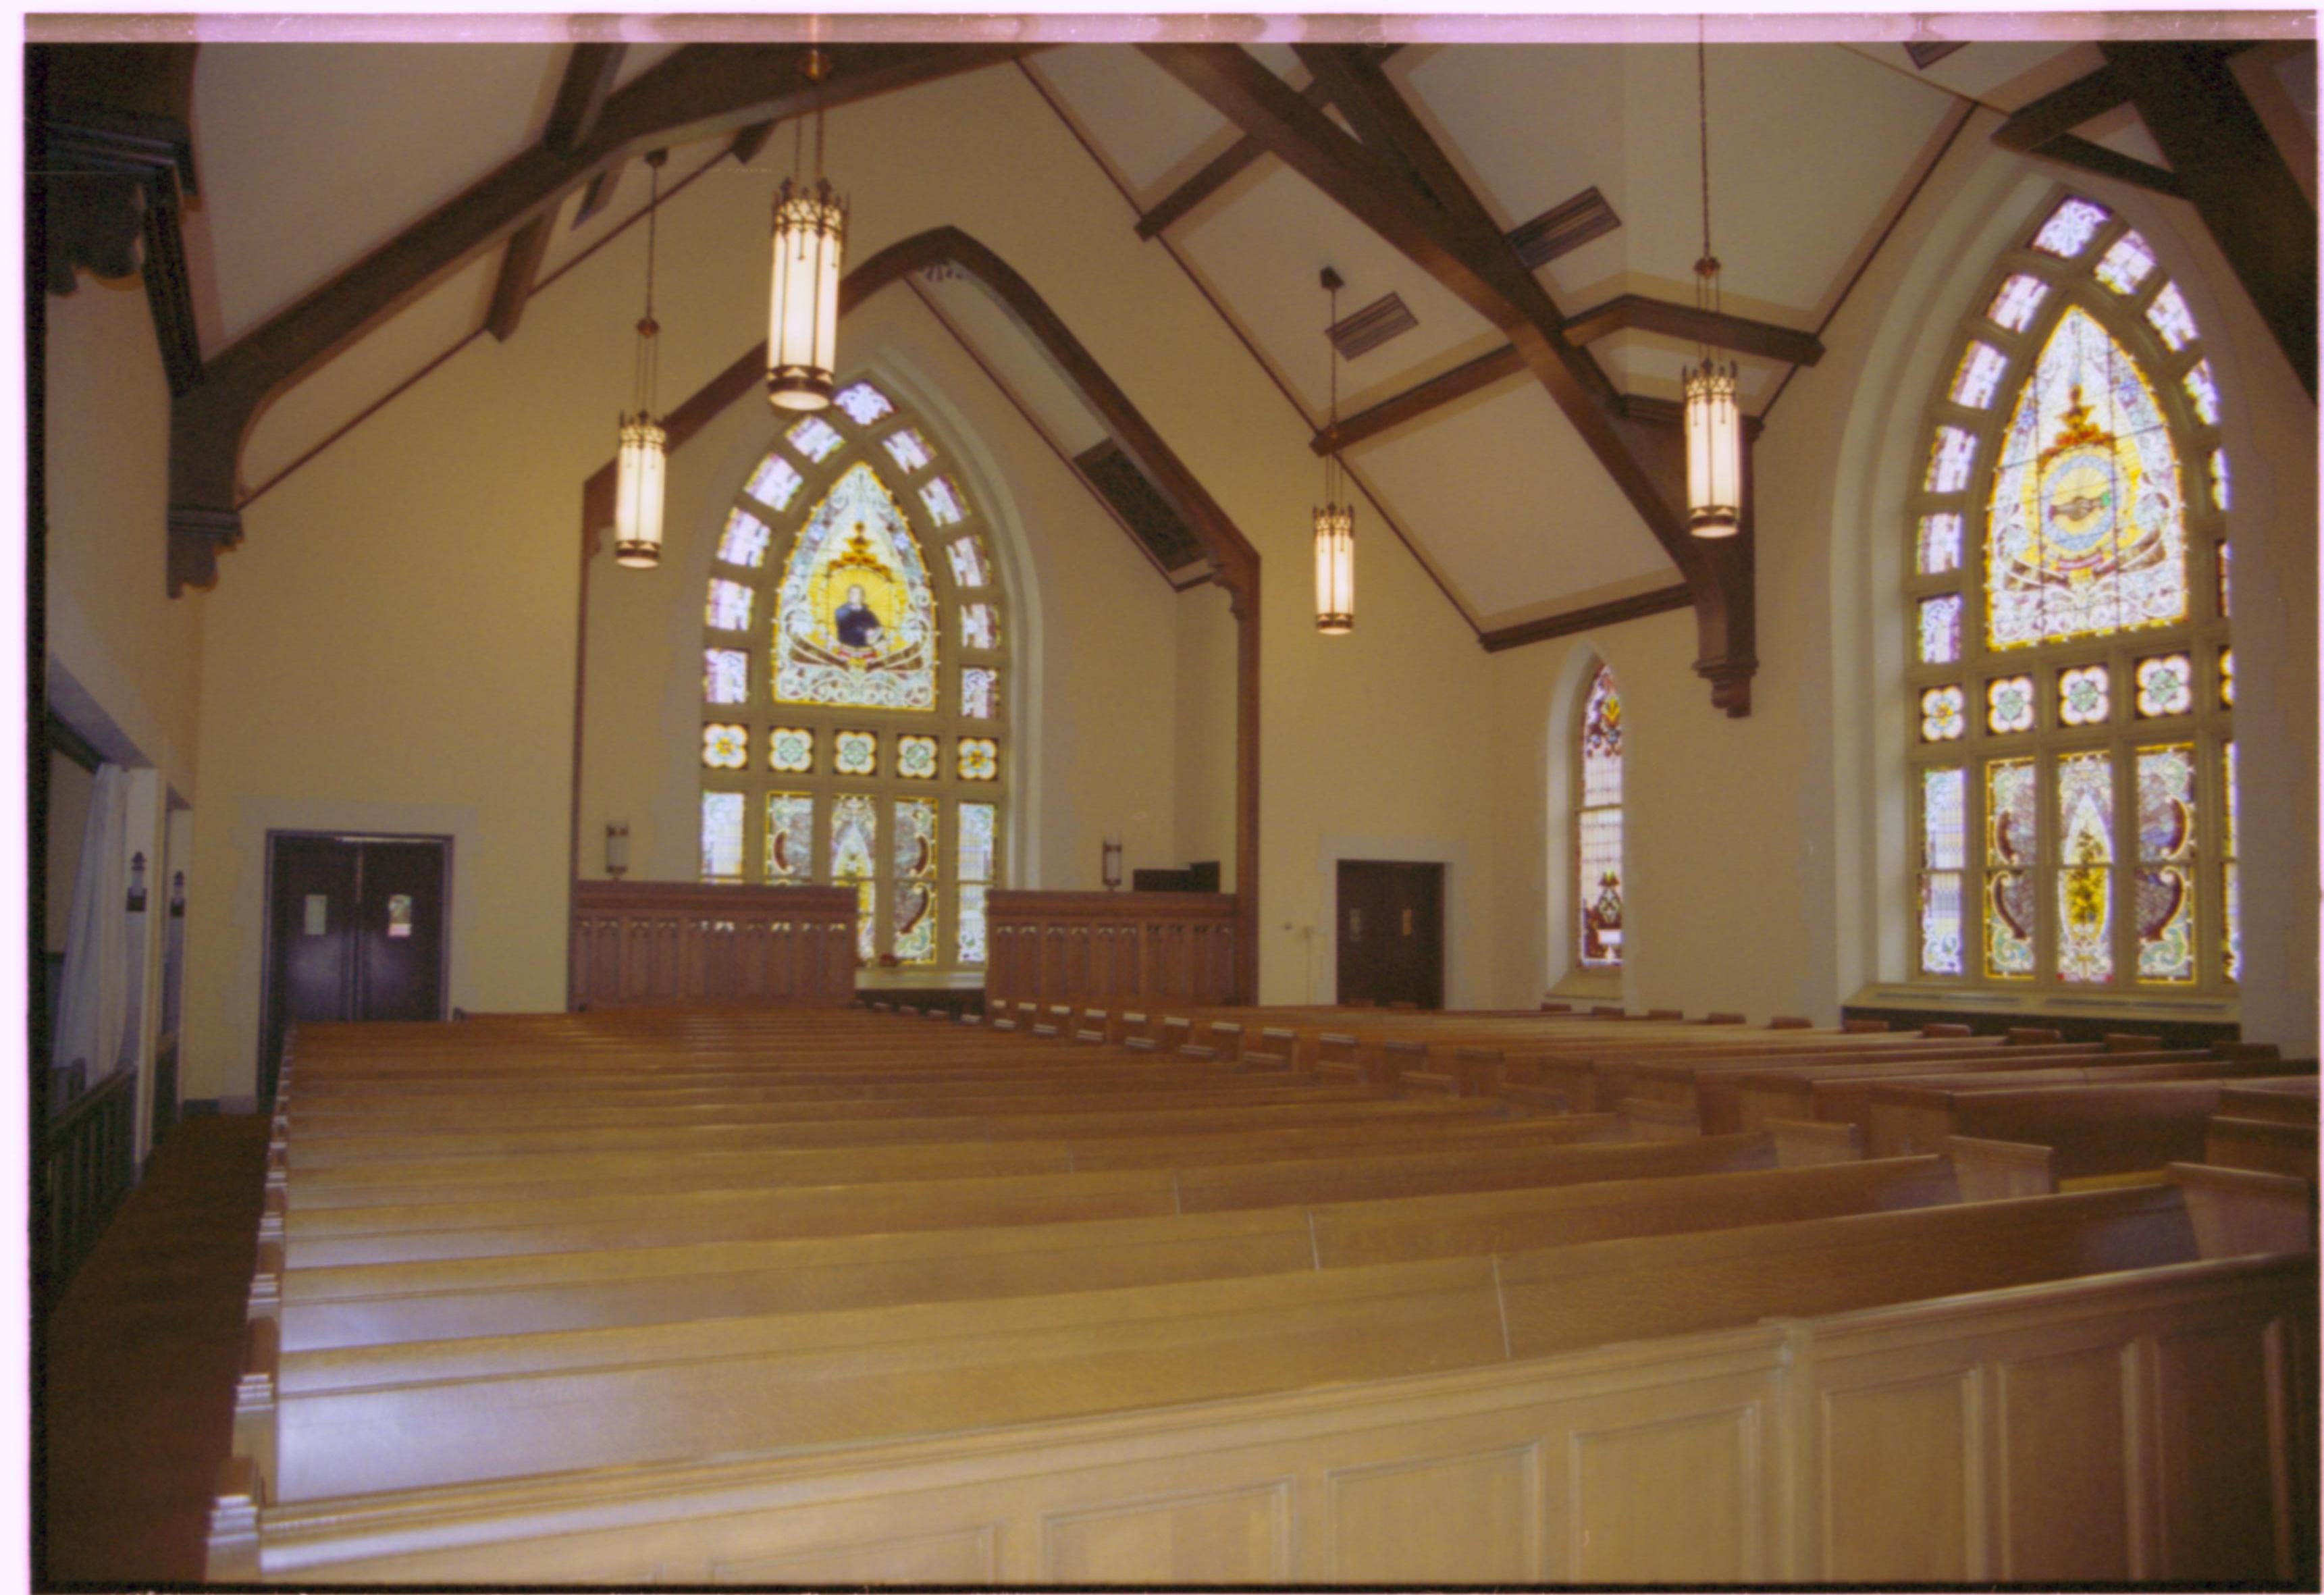 Church pews and stained glass windows. Grace Lutheran Church